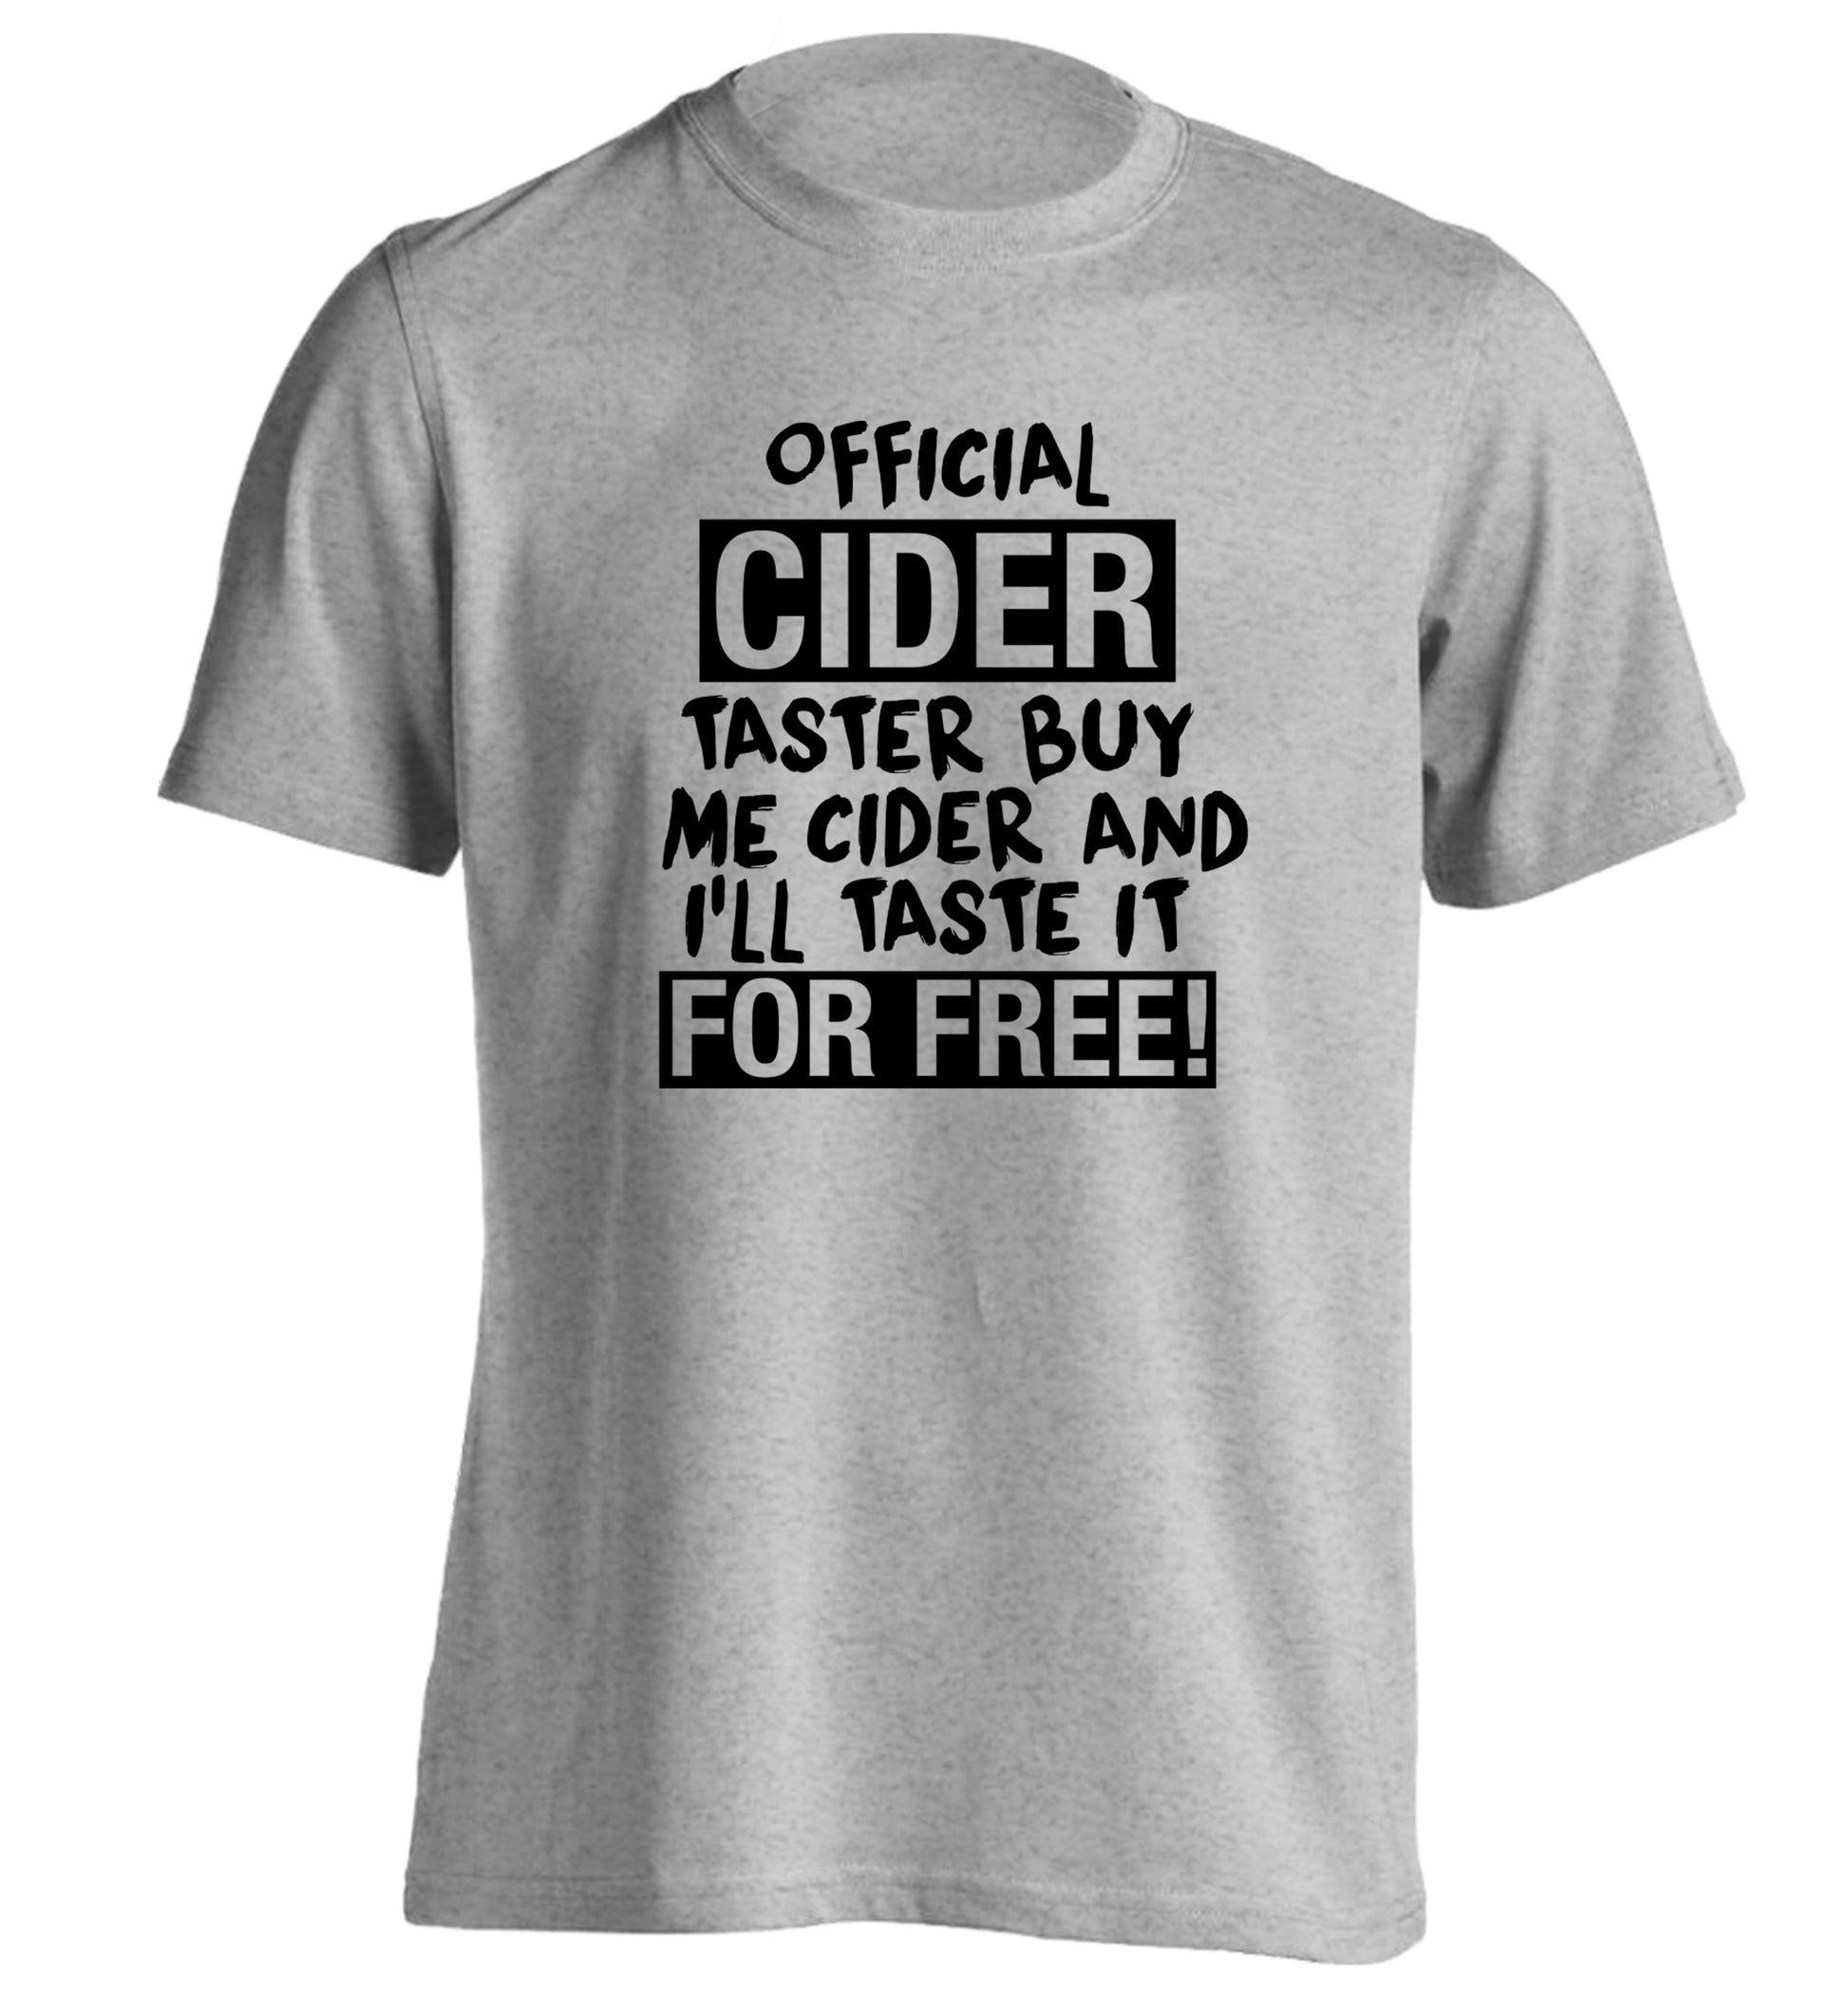 Official cider taster buy me cider and I'll taste it for free! adults unisex grey Tshirt 2XL